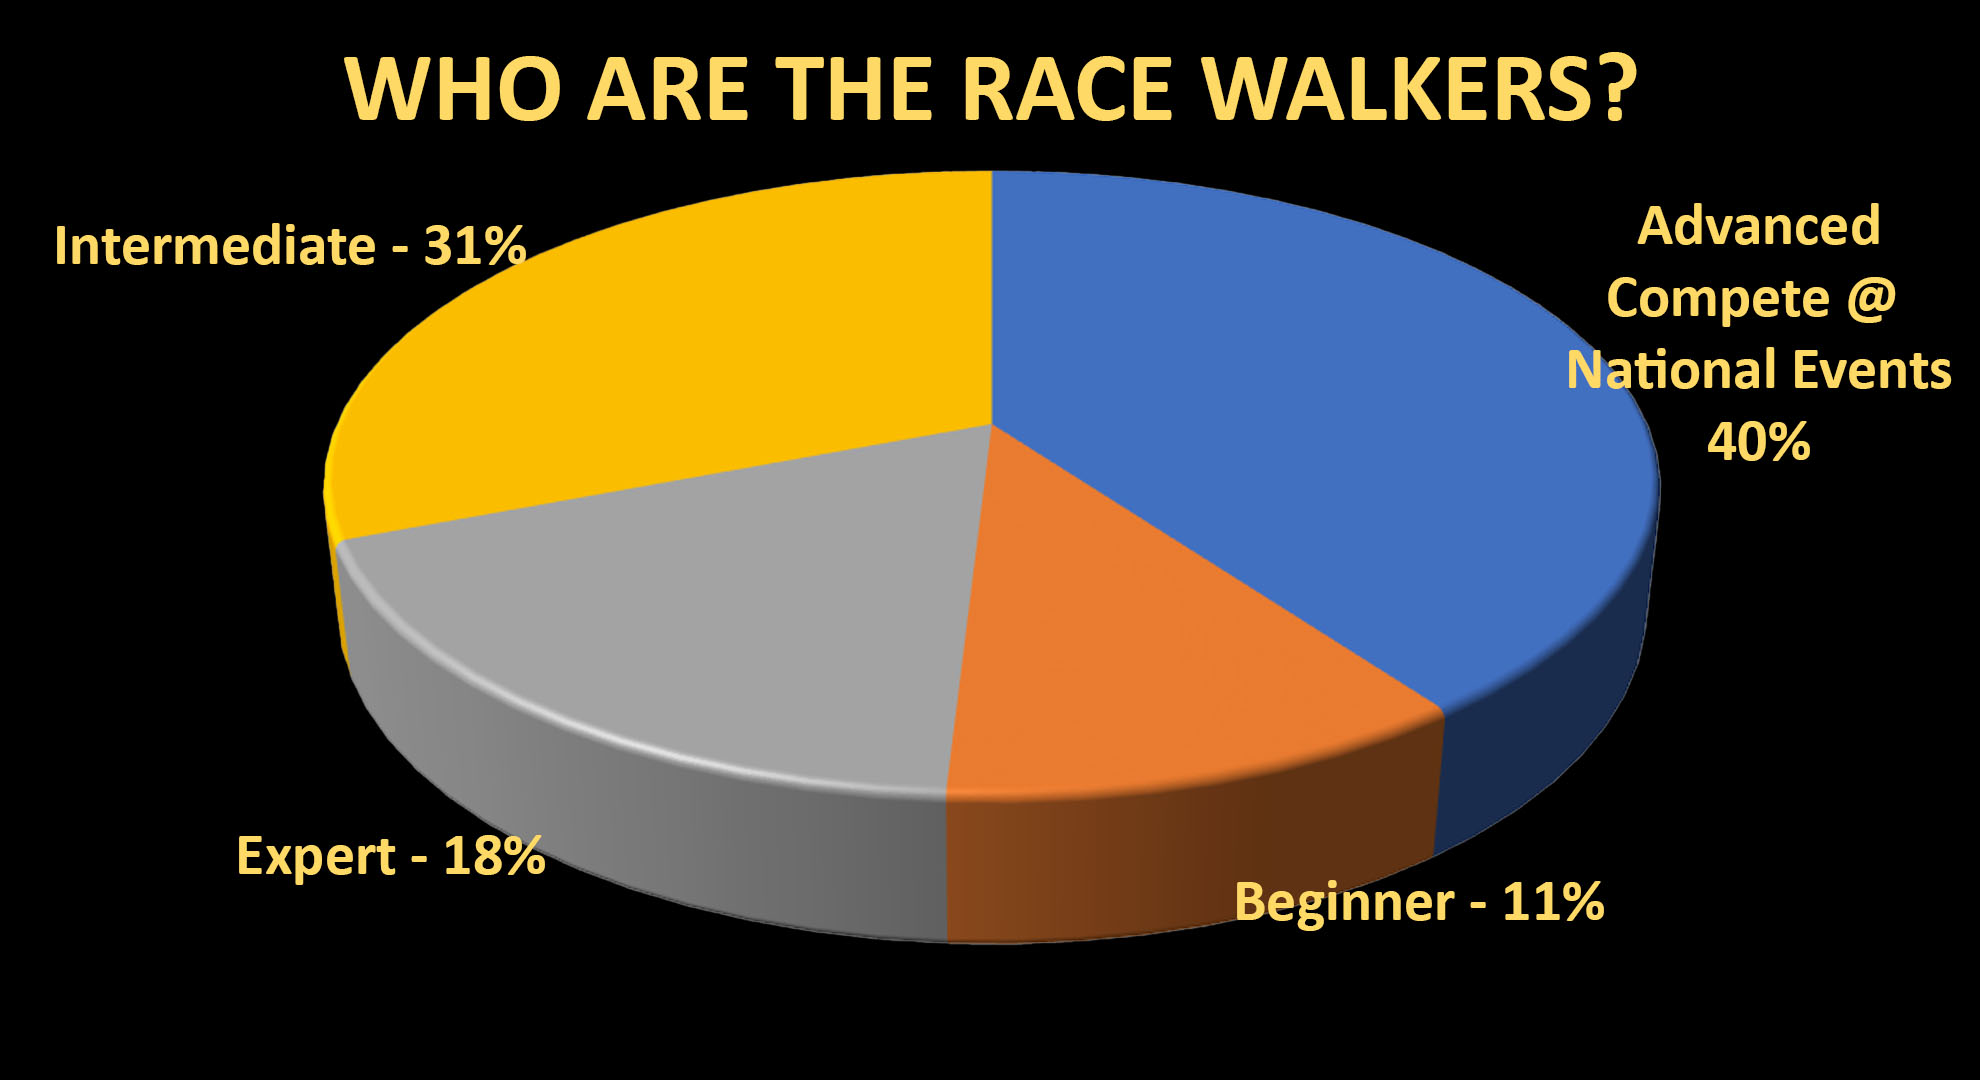 Who filled out the race walking shoe survey?